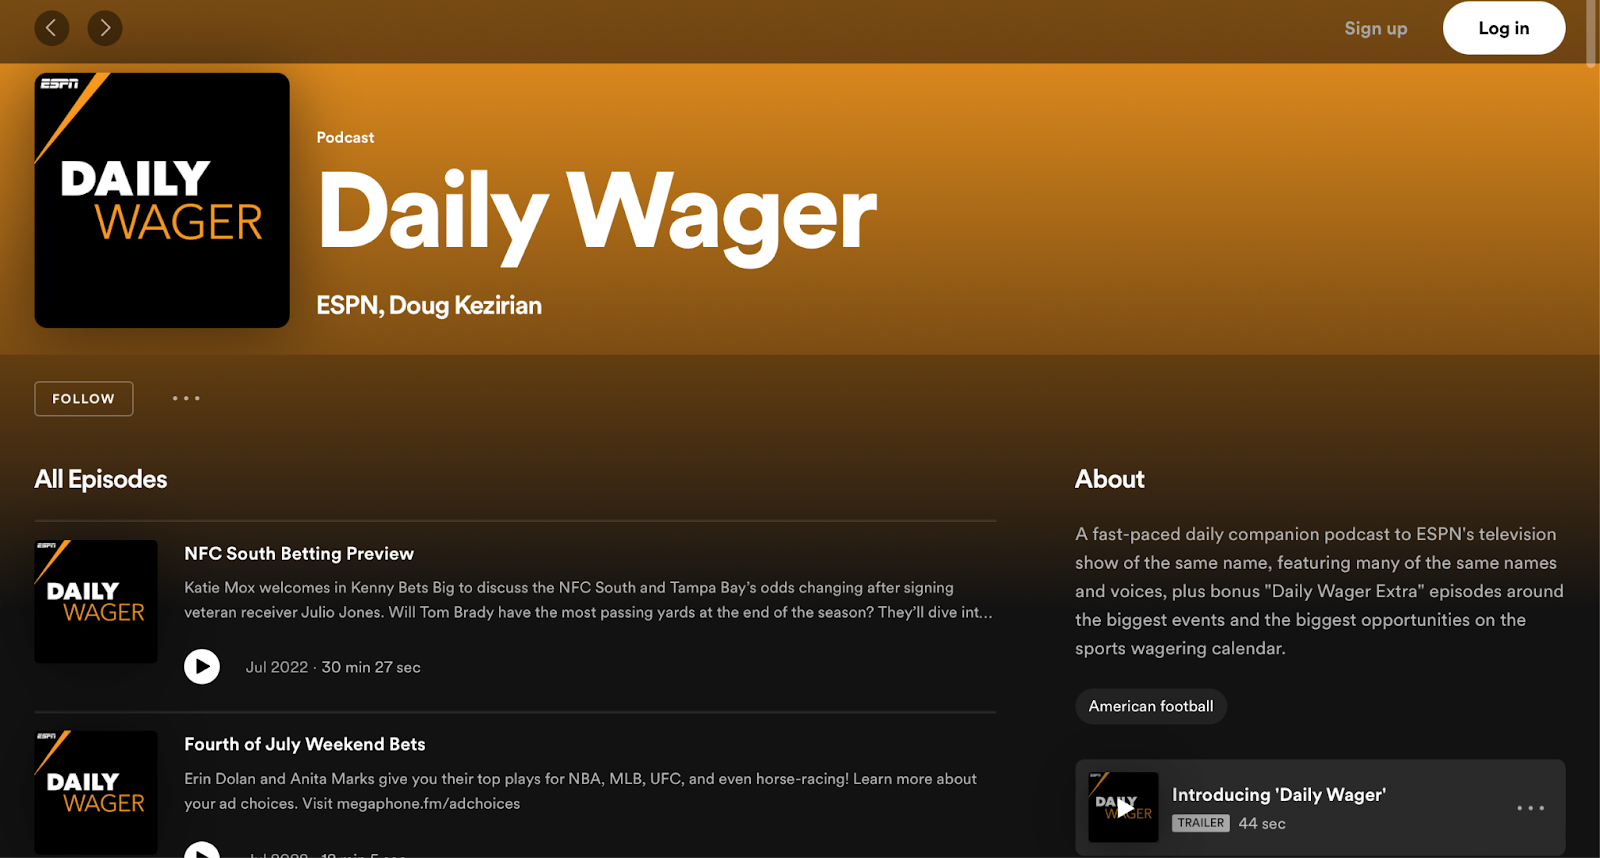 All About Daily Wager Podcast: The Latest Sports Betting News And Insights From ESPN's Experts